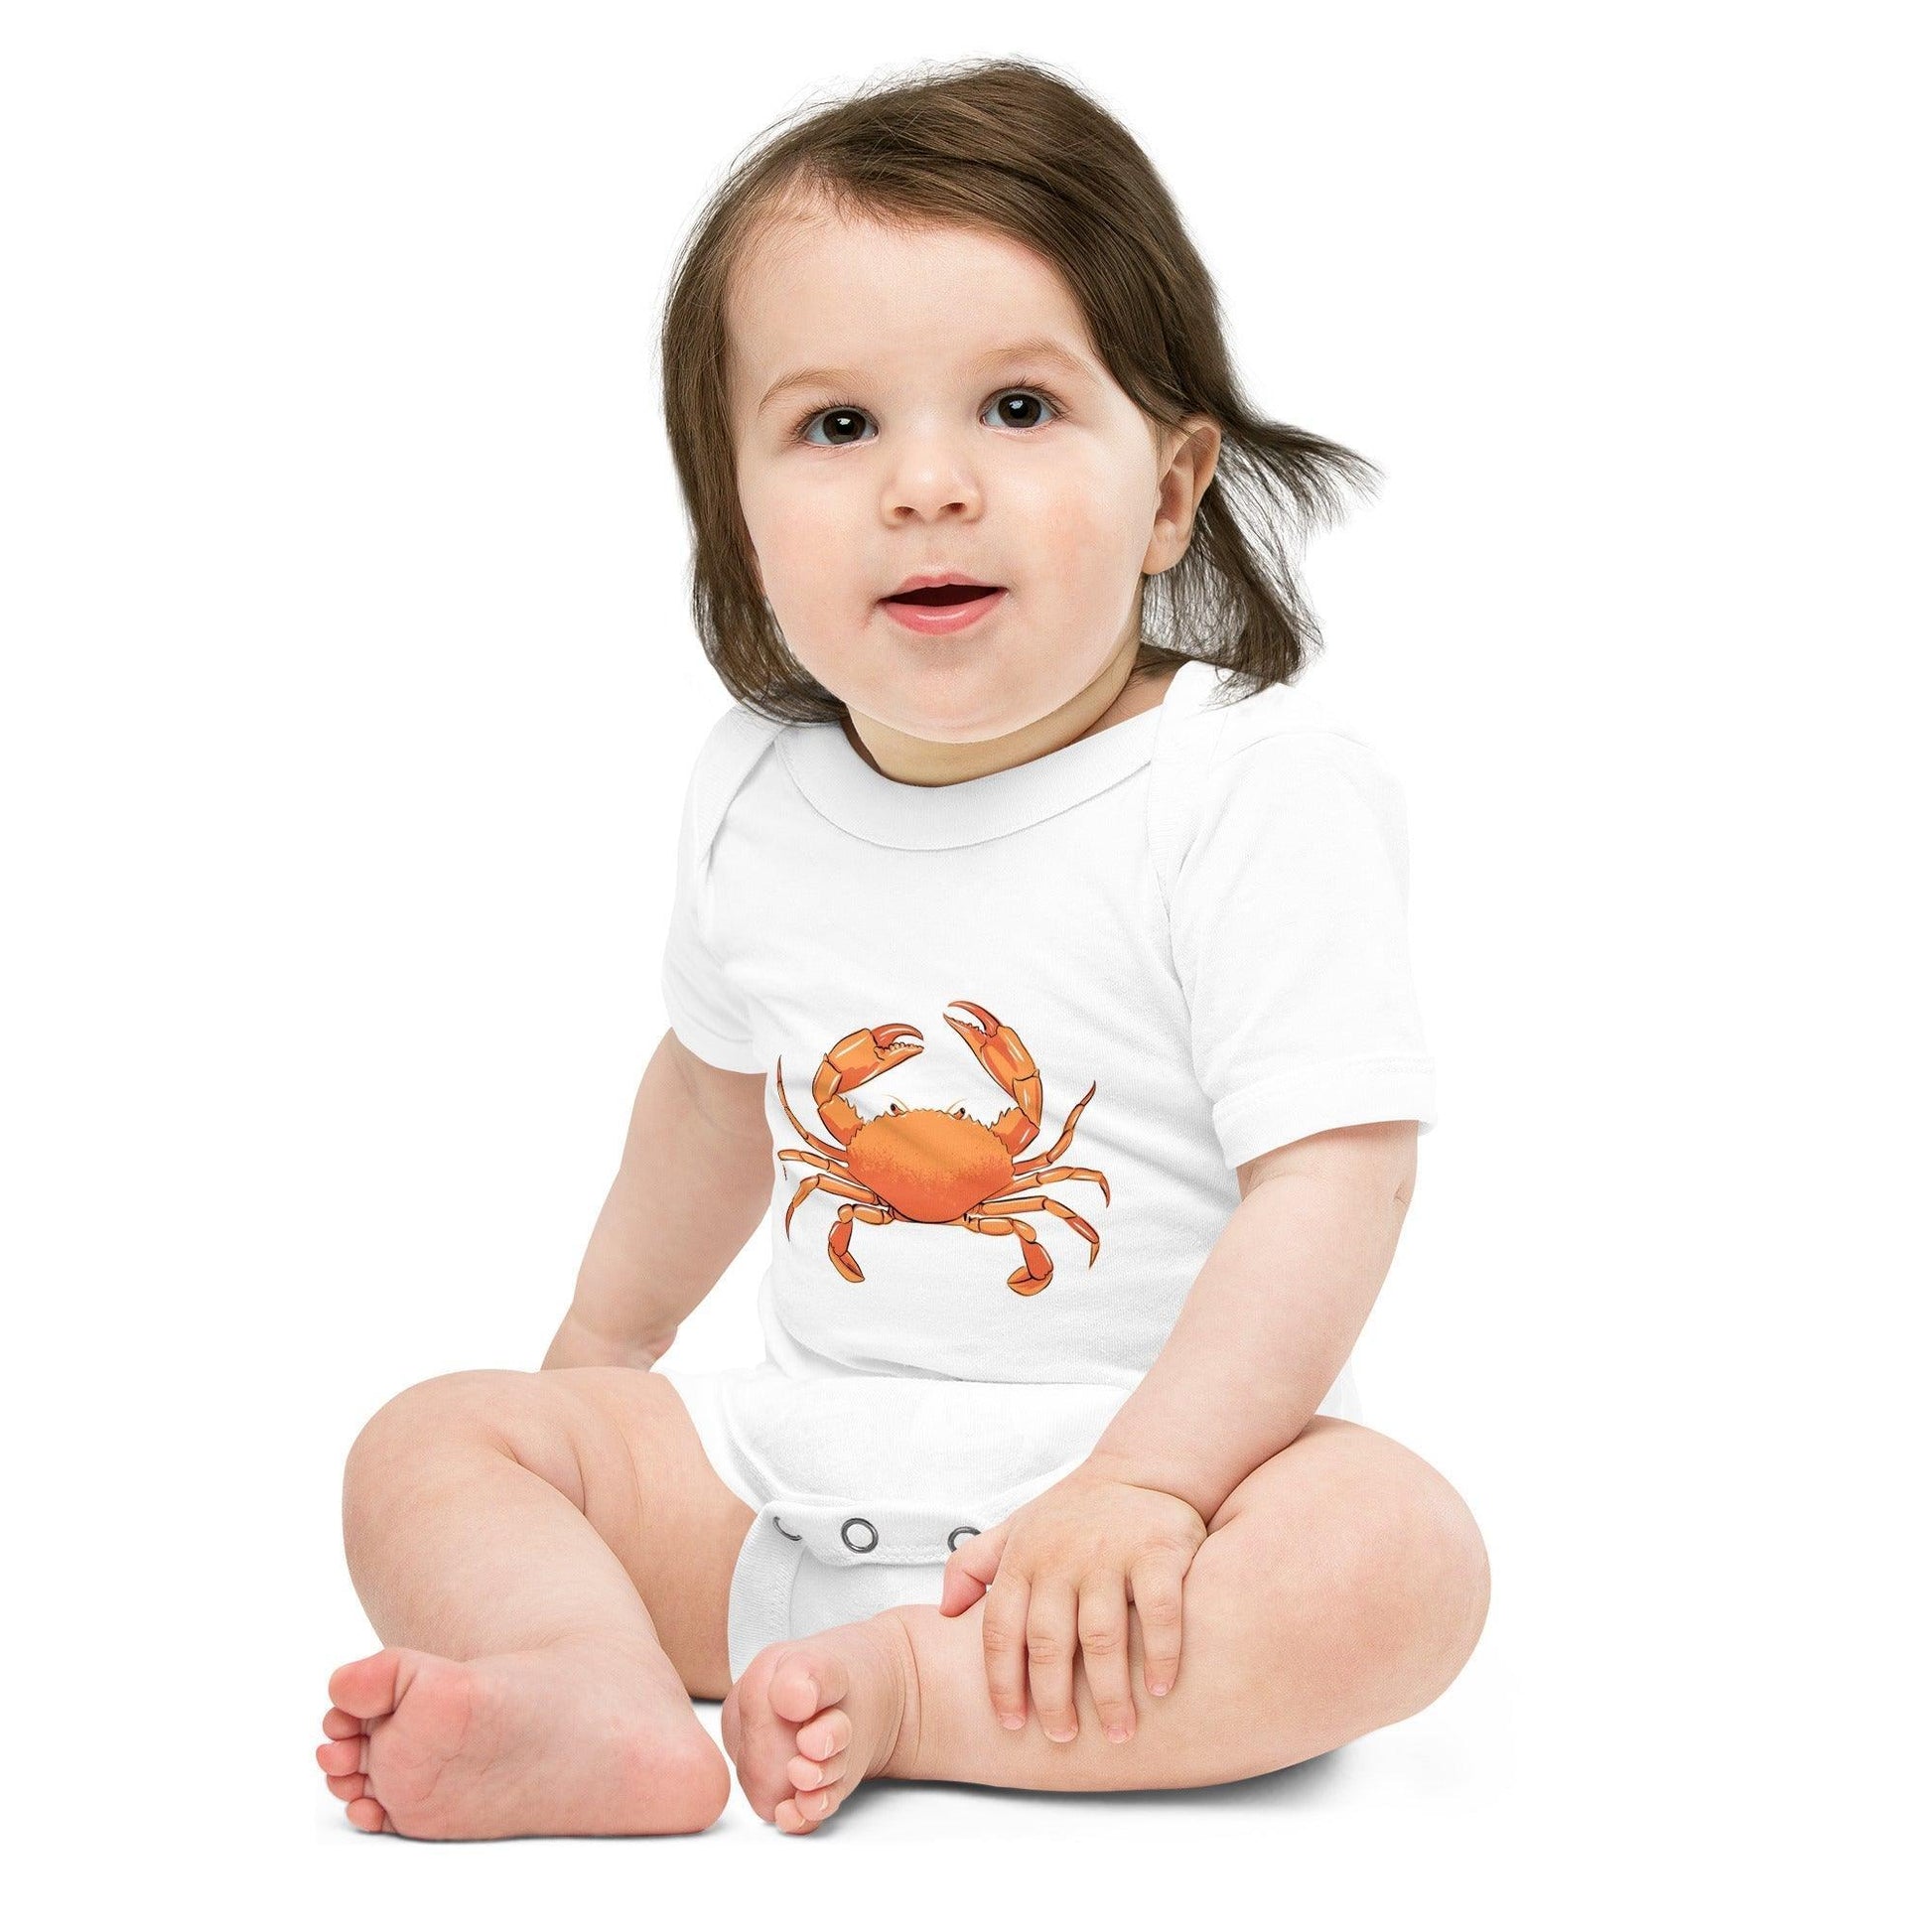 A baby with long brown hair wearing a white baby onesies with a light red crab printed on it